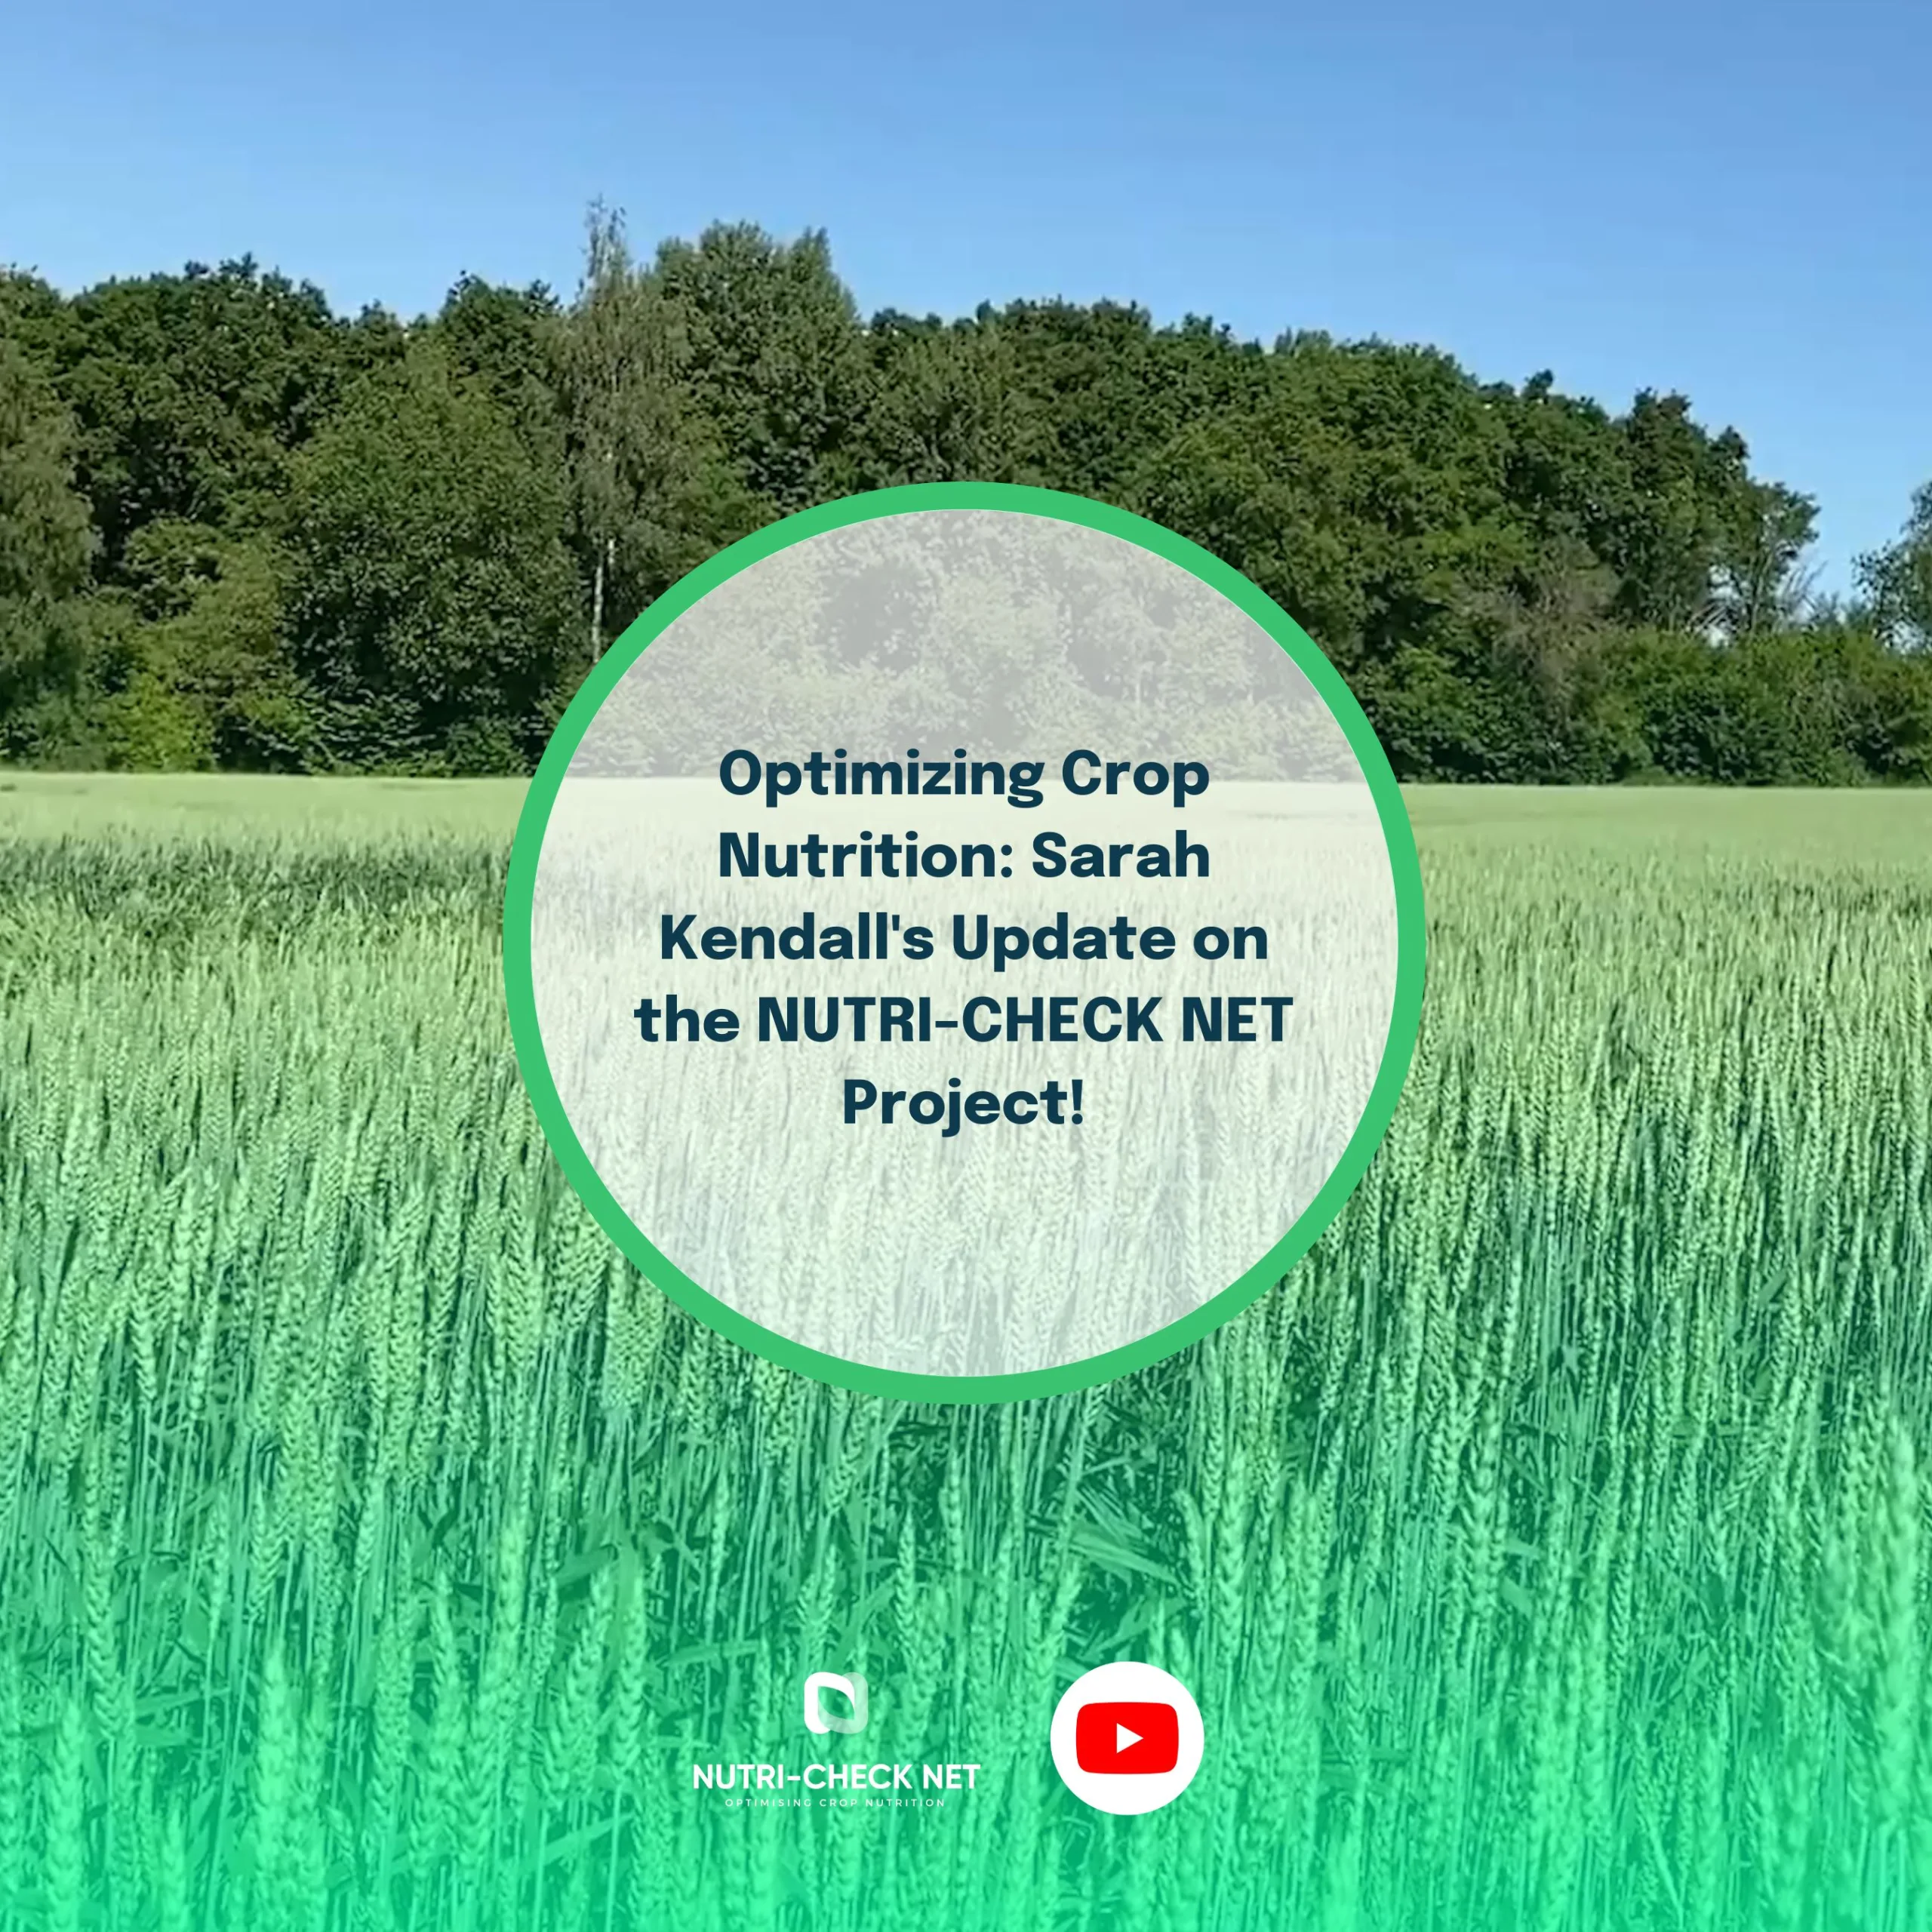 Optimizing Crop Nutrition: Sarah Kendall’s Update on the NUTRI-CHECK NET Project